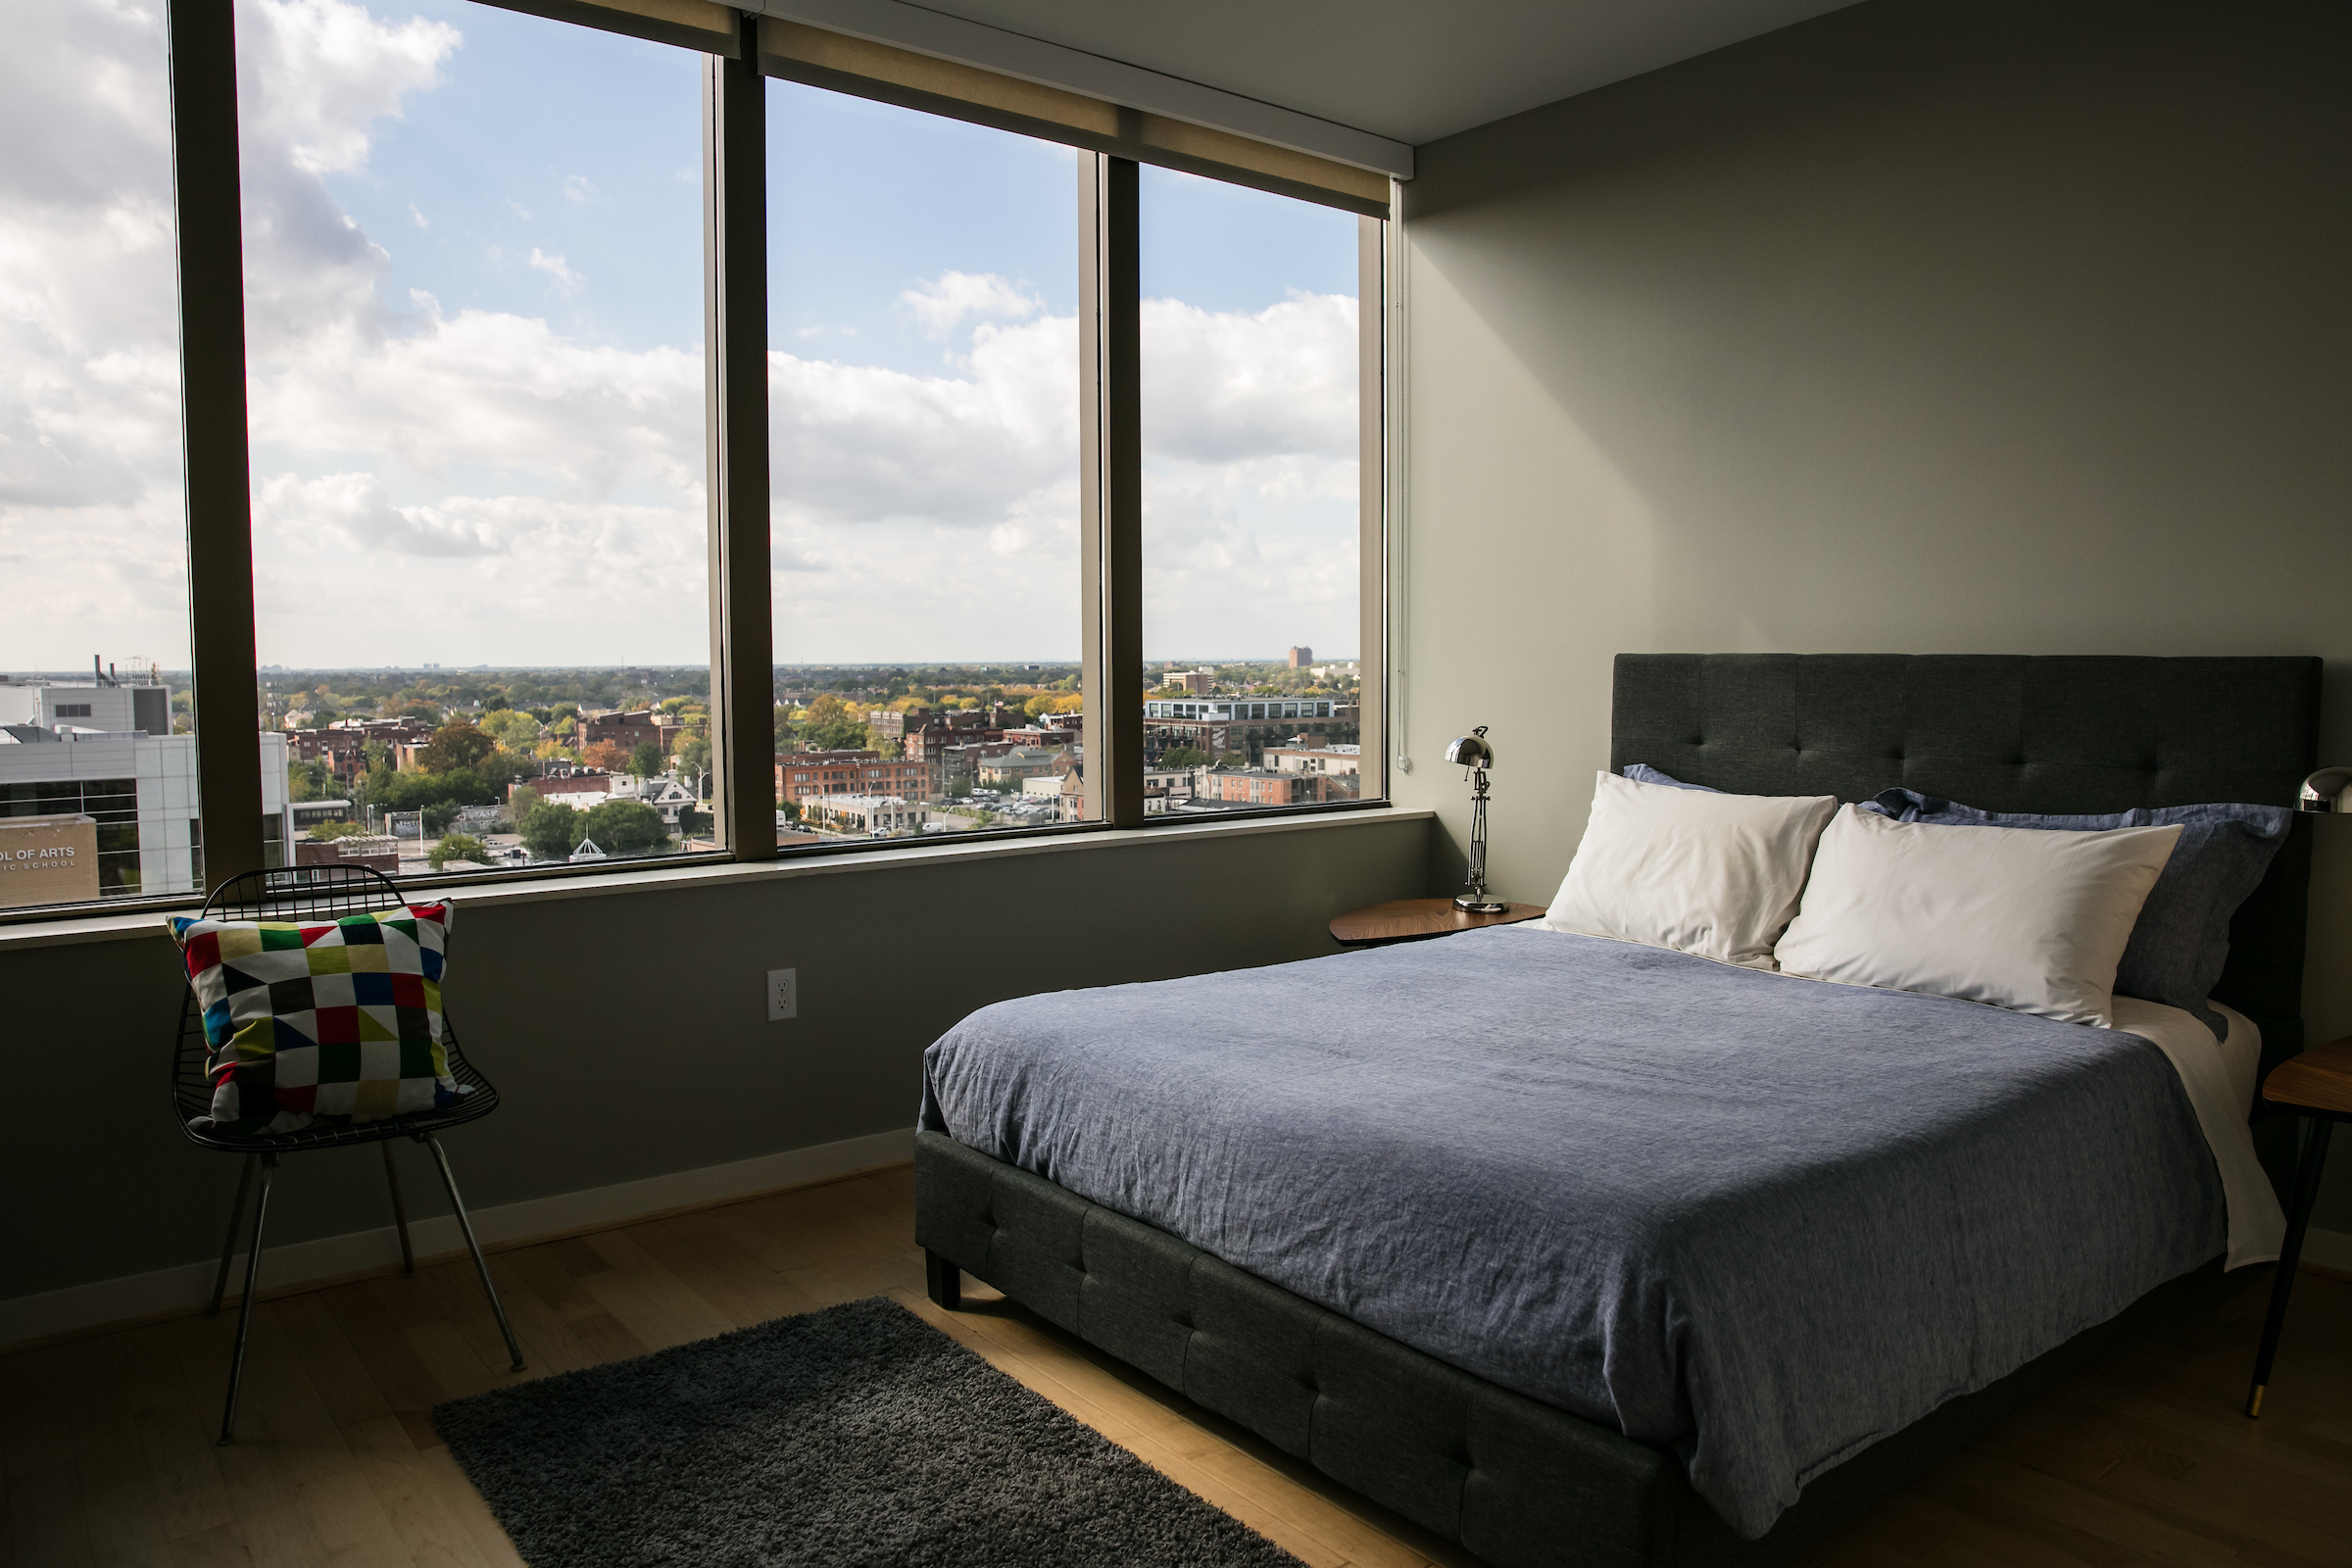 A bedroom with windows overlooking a city.